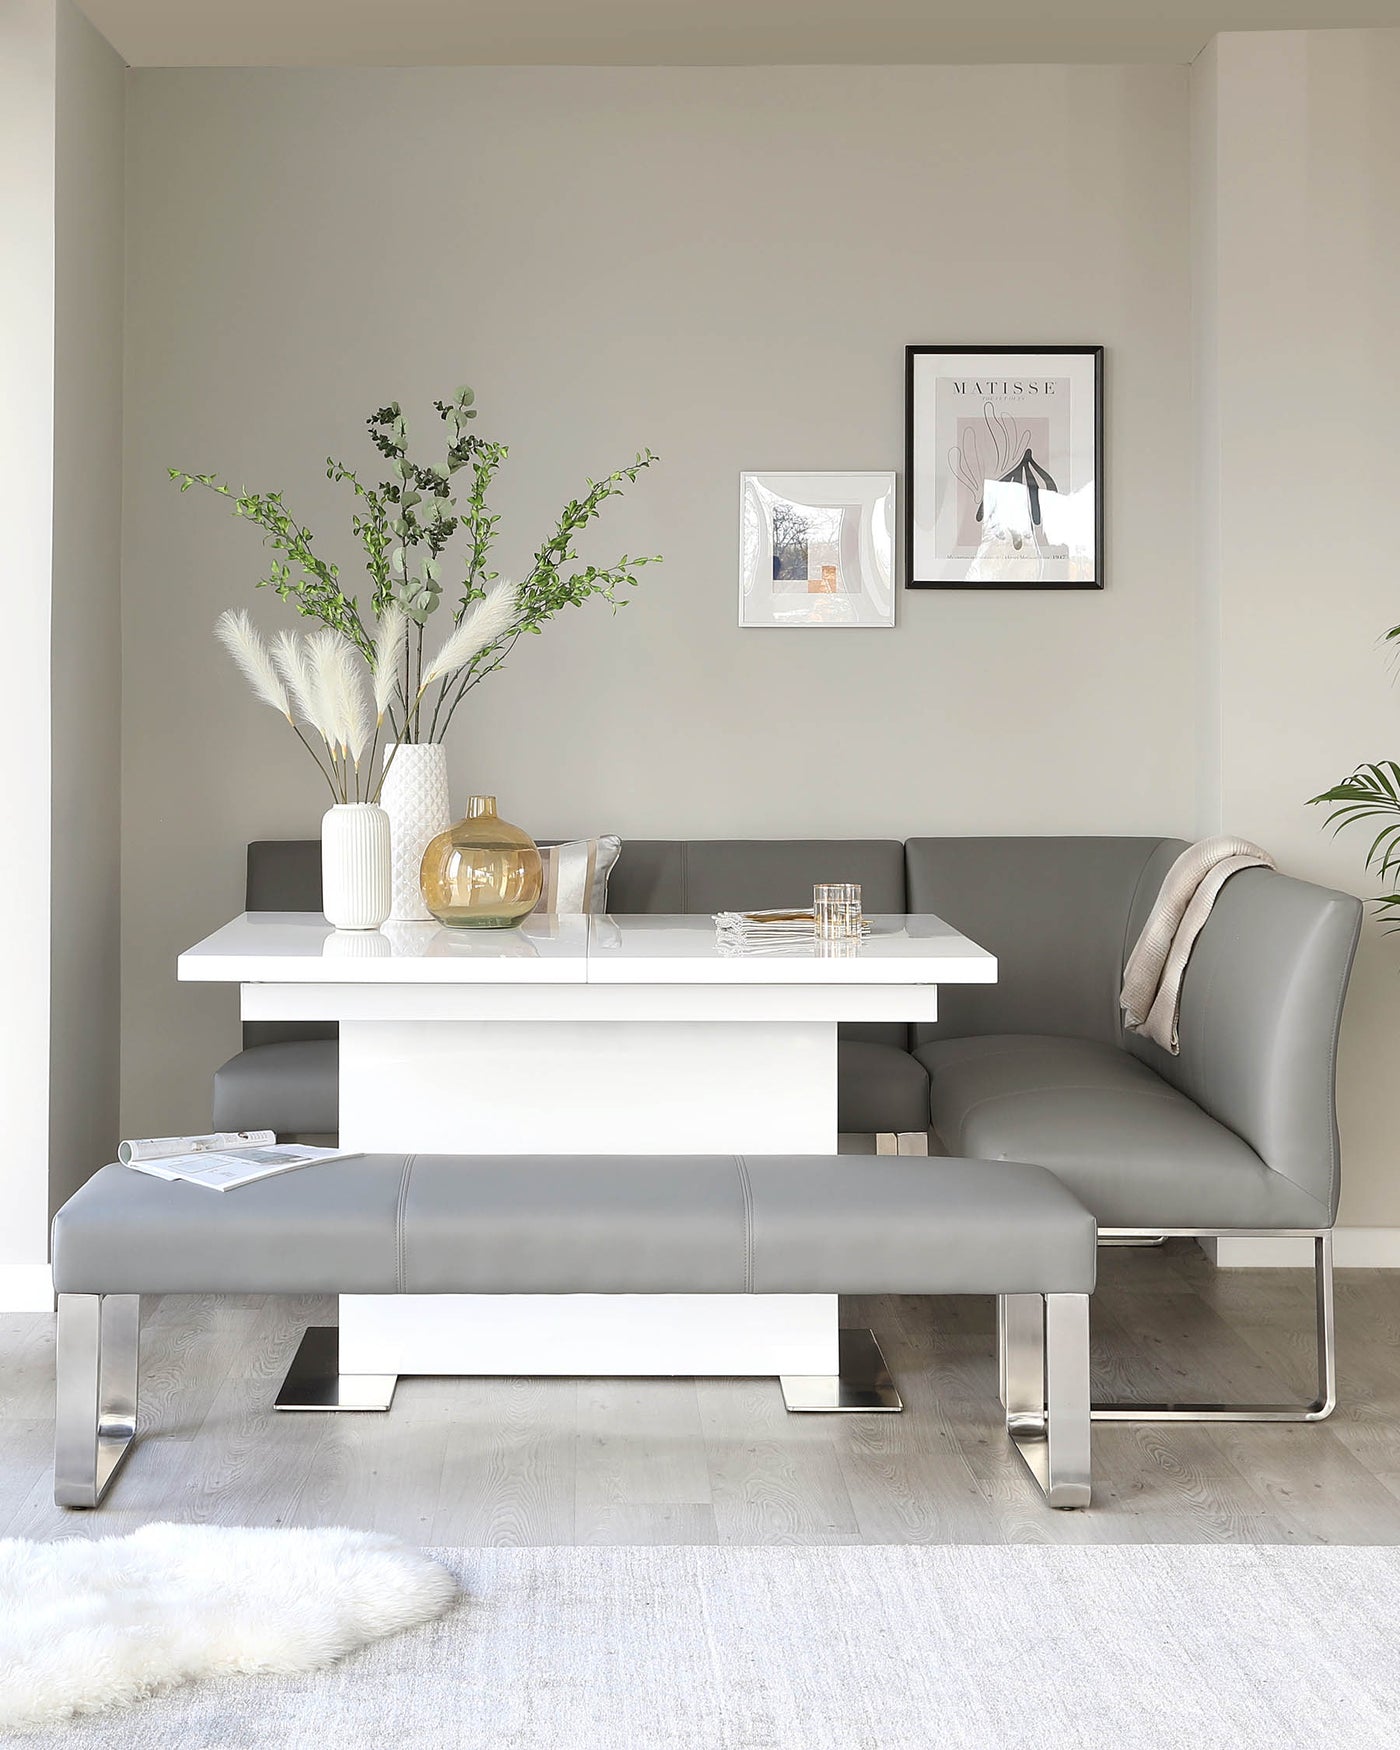 Modern minimalist-style dining set featuring a white rectangular table with a sleek design and a matching white bench paired with a grey upholstered corner bench seat with chrome legs, creating a contemporary dining nook.